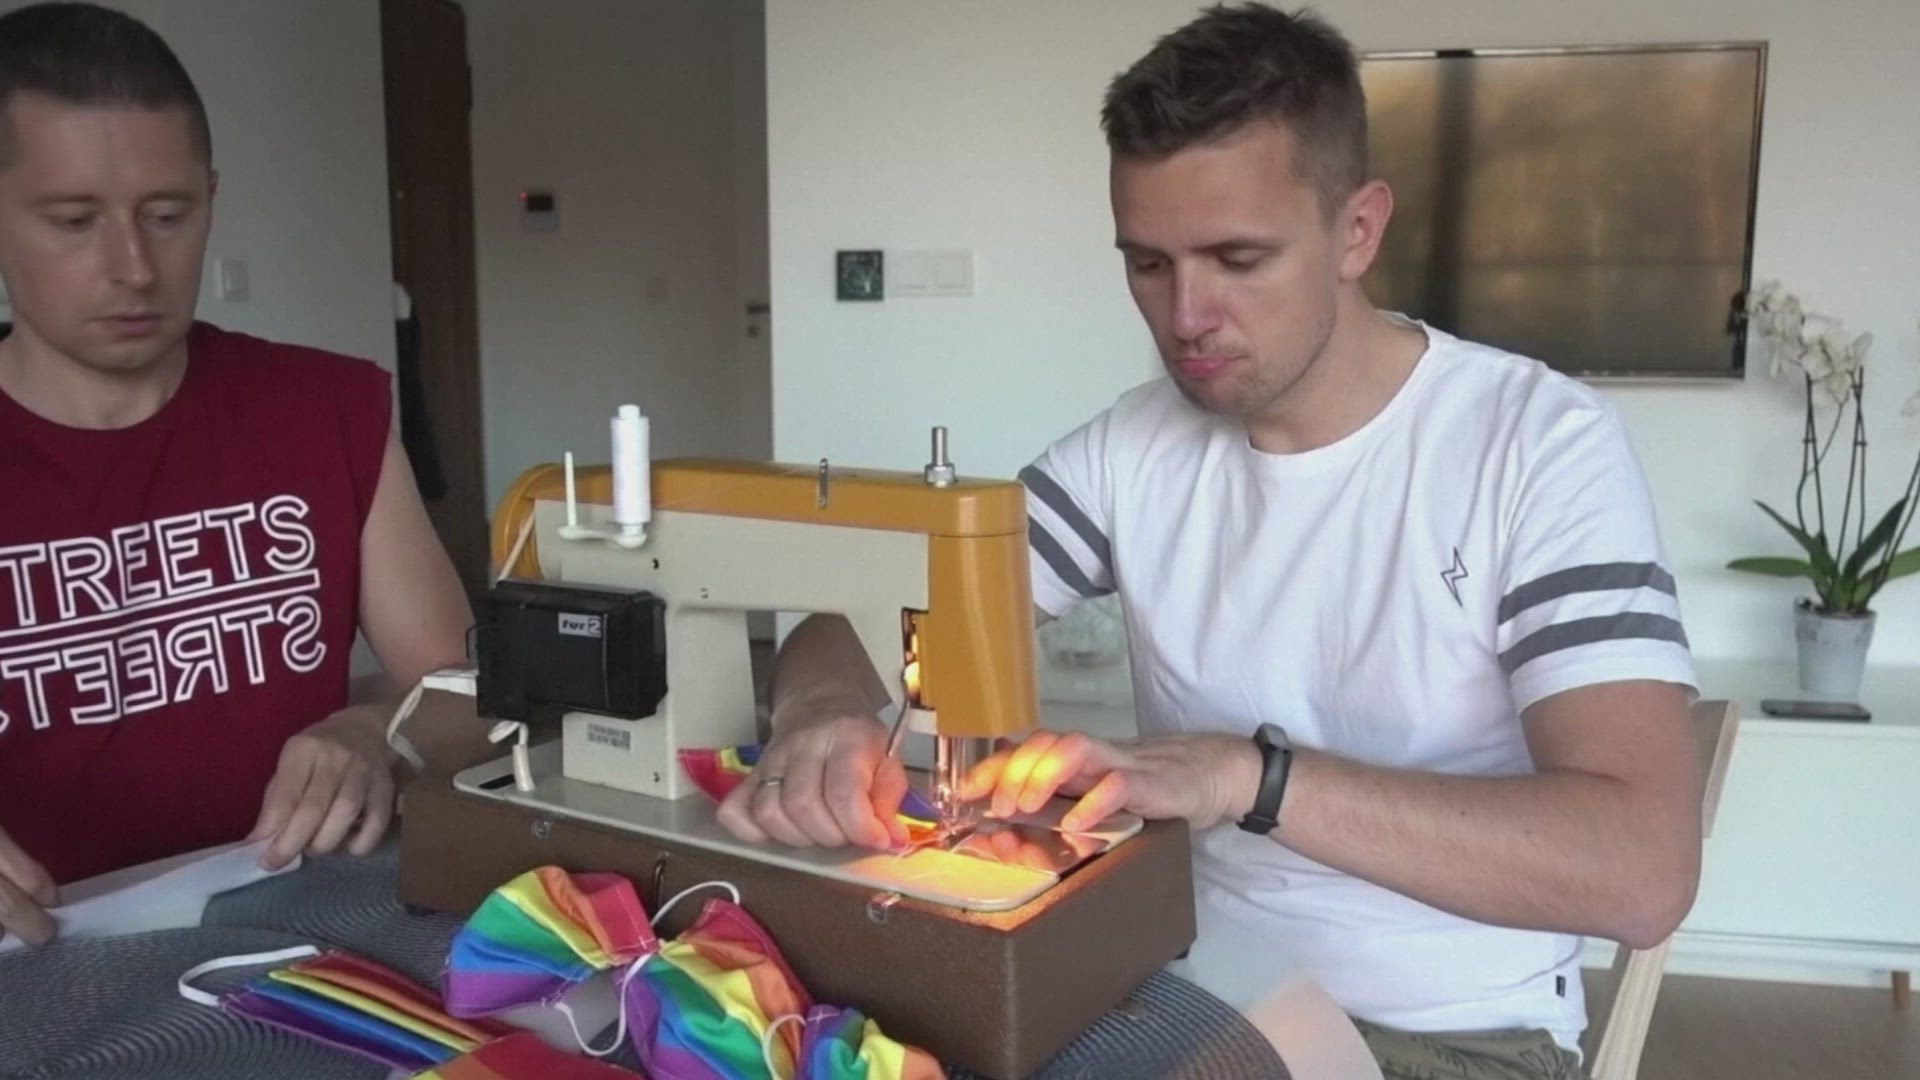 A gay married couple in Poland is handing out rainbow face masks during the coronavirus pandemic, in an effort to combat prejudice against LGBT people in their country.